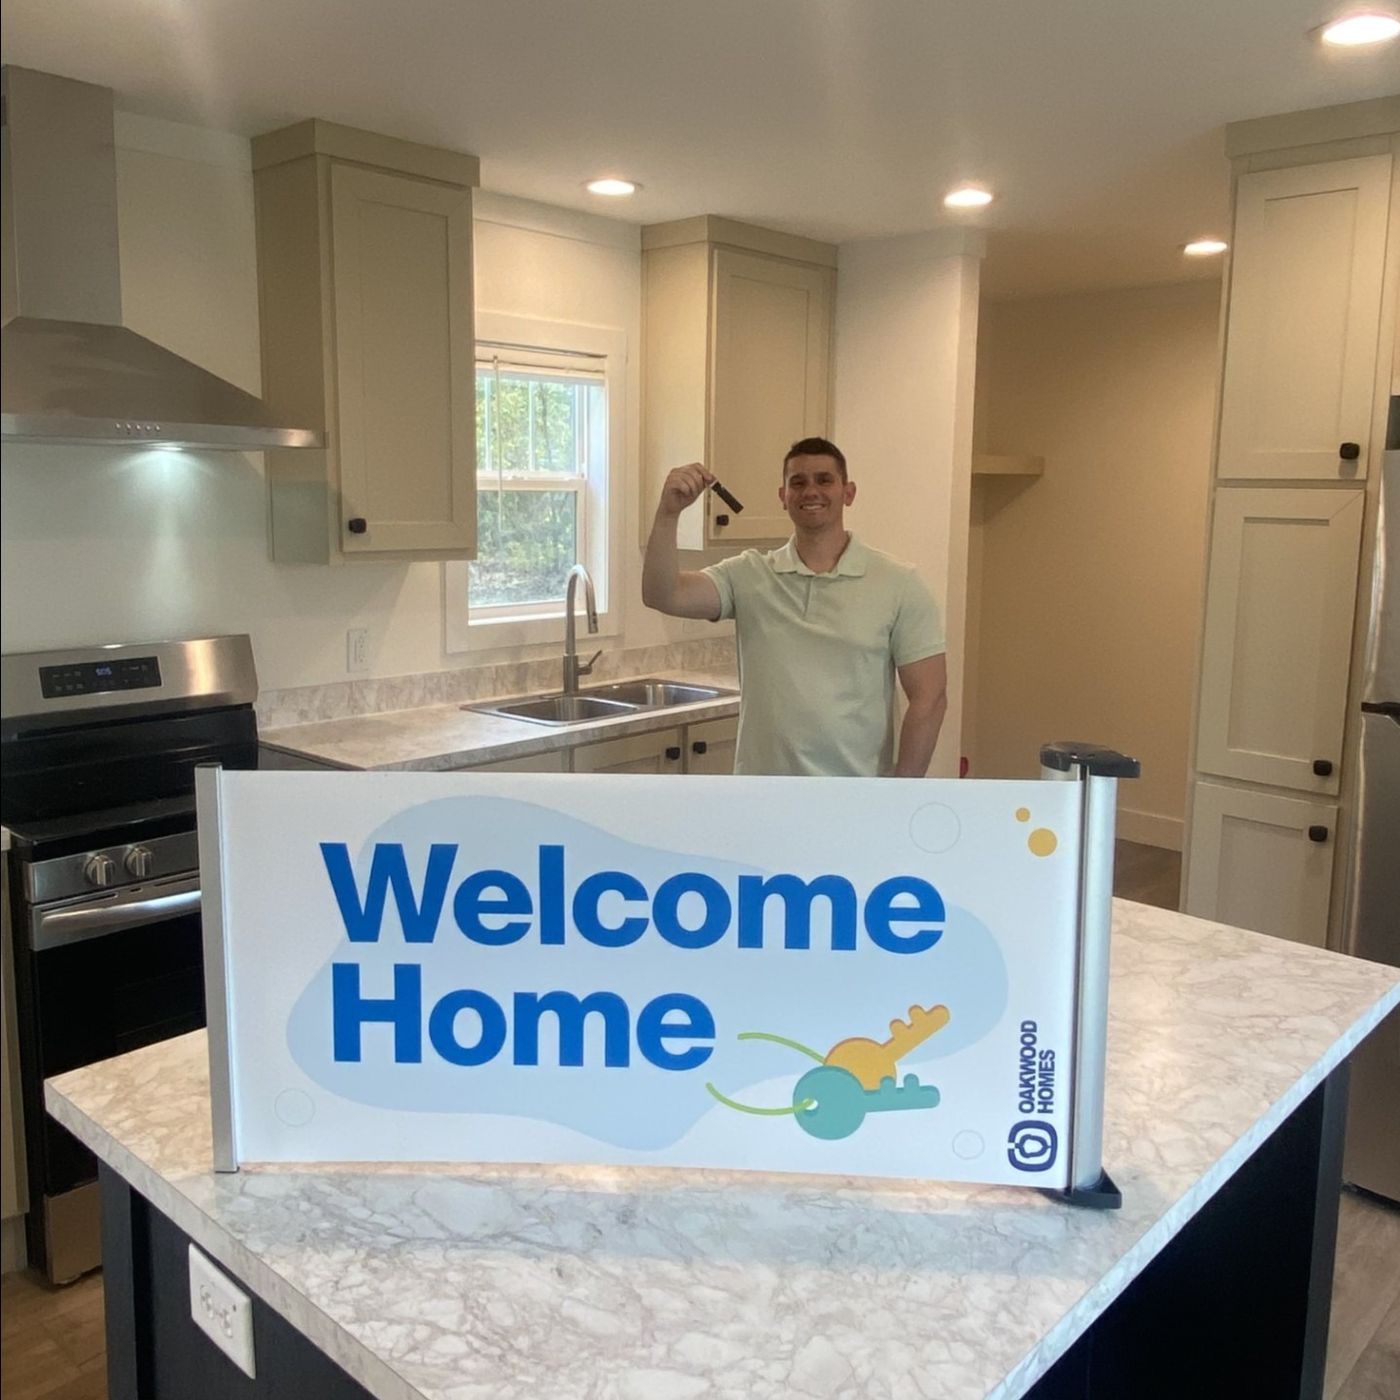 STEVEN O. welcome home image